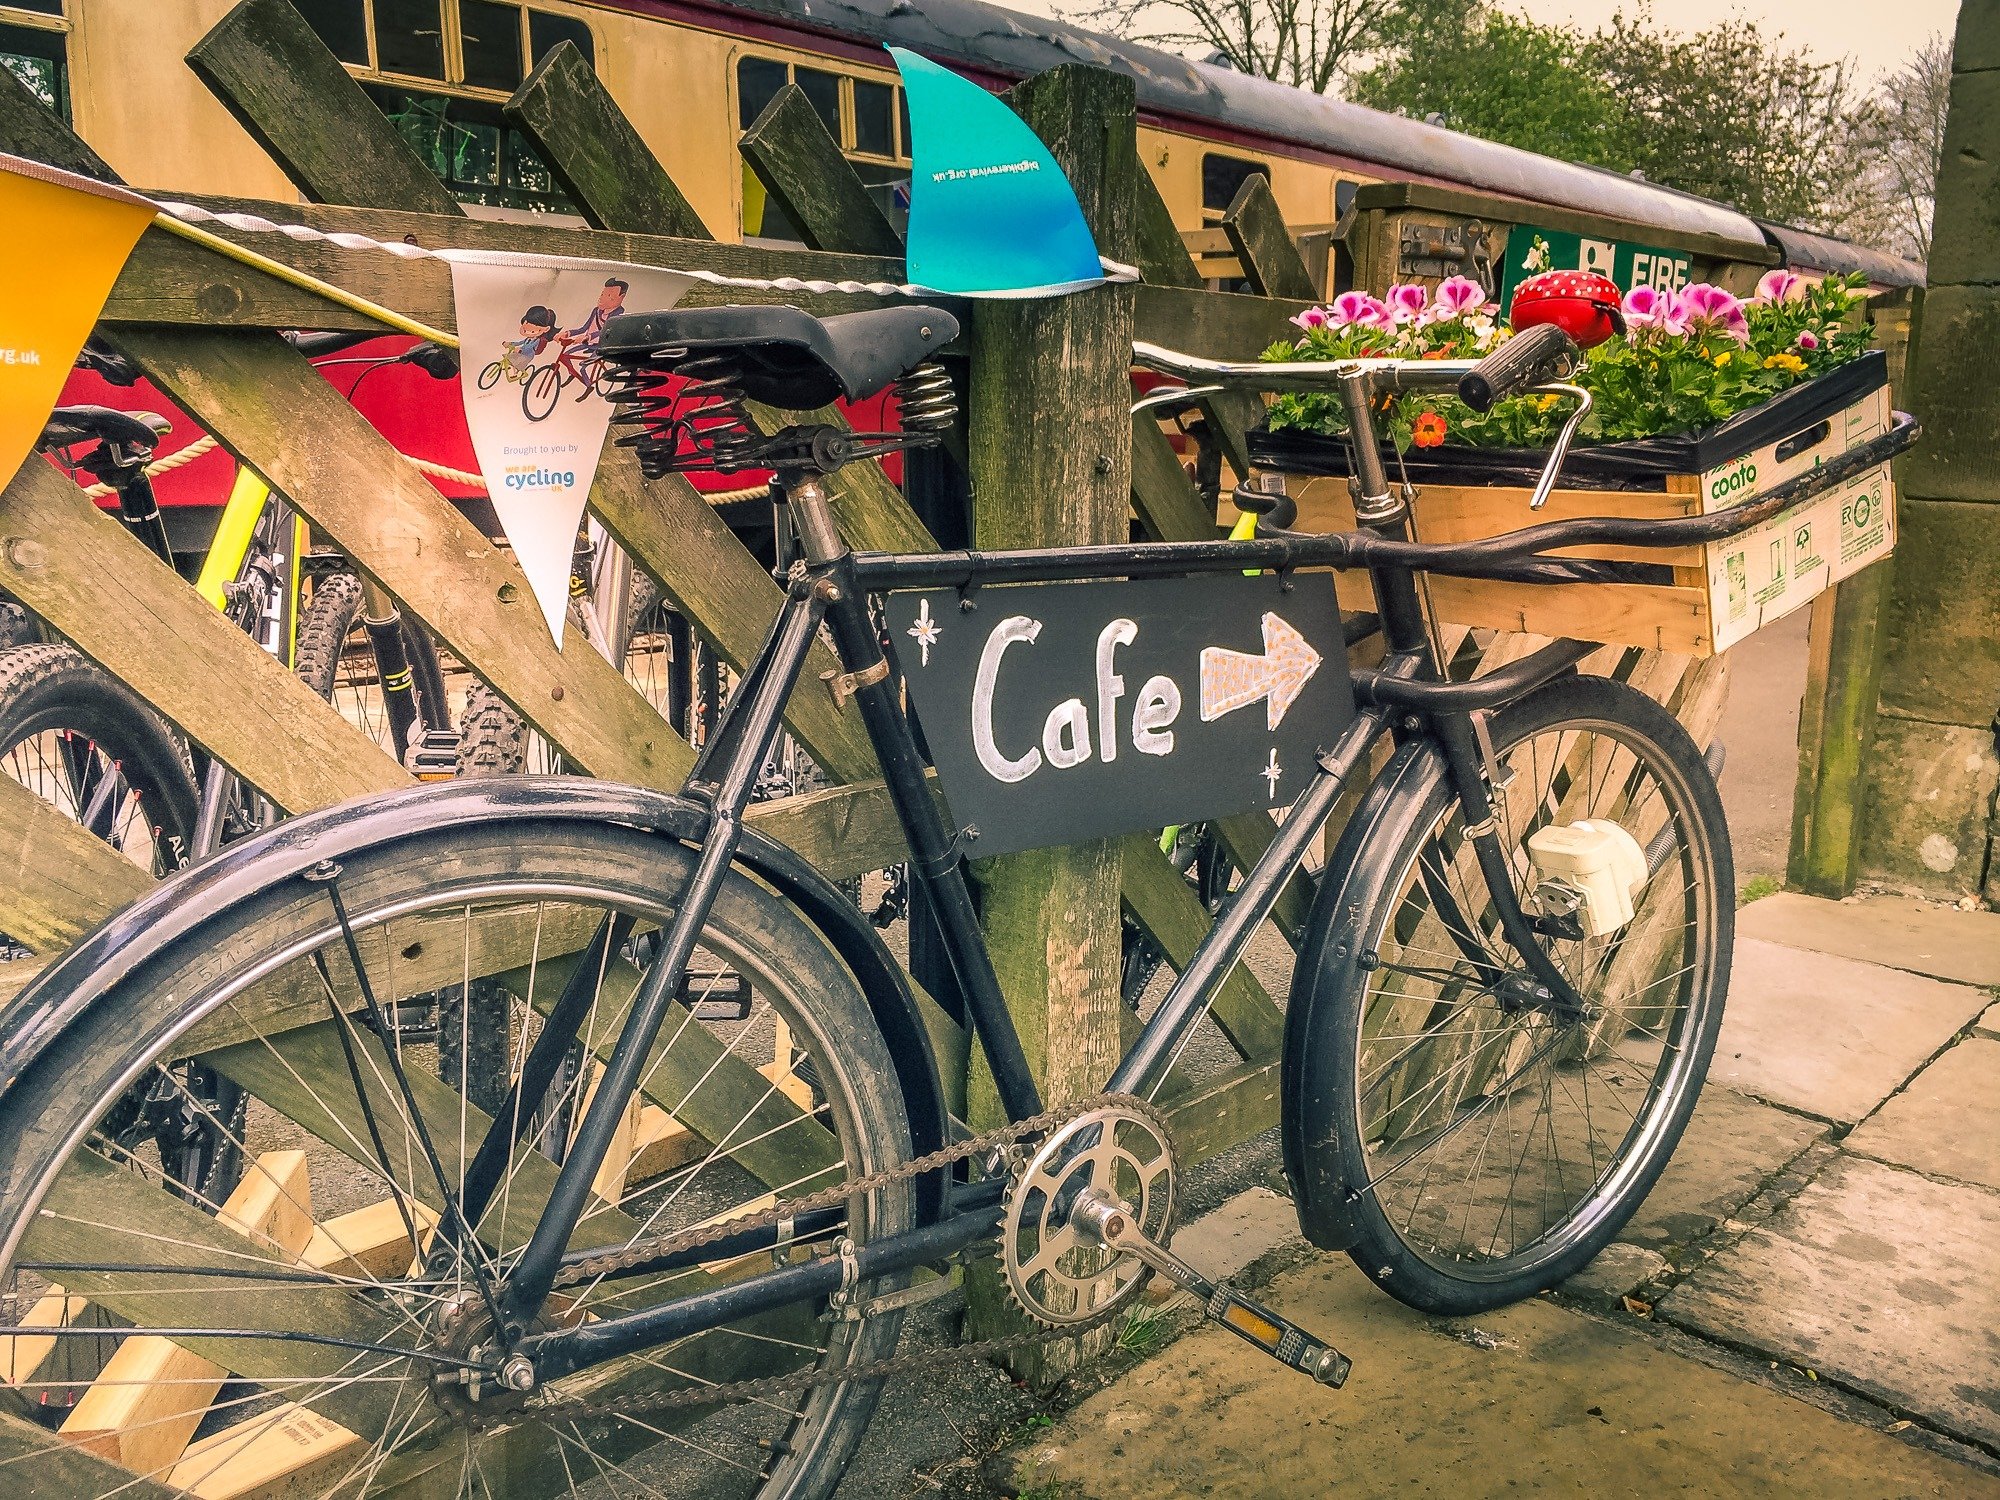 A Wensleydale Bike Tour with Stage 1 Cycles